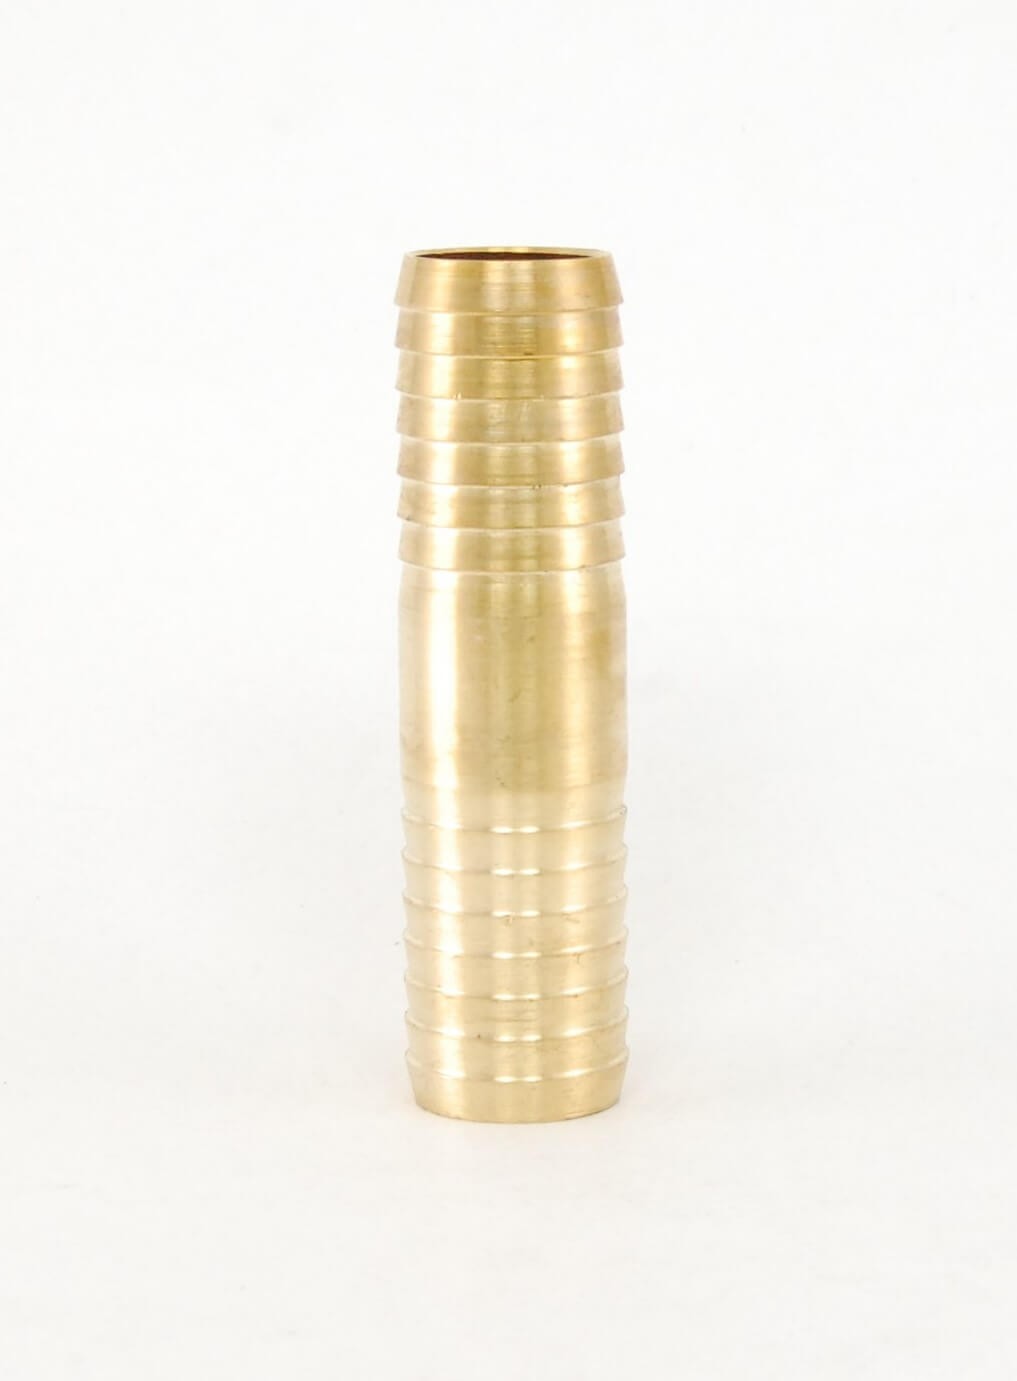 Brass Poly Pipe Insert Coupling